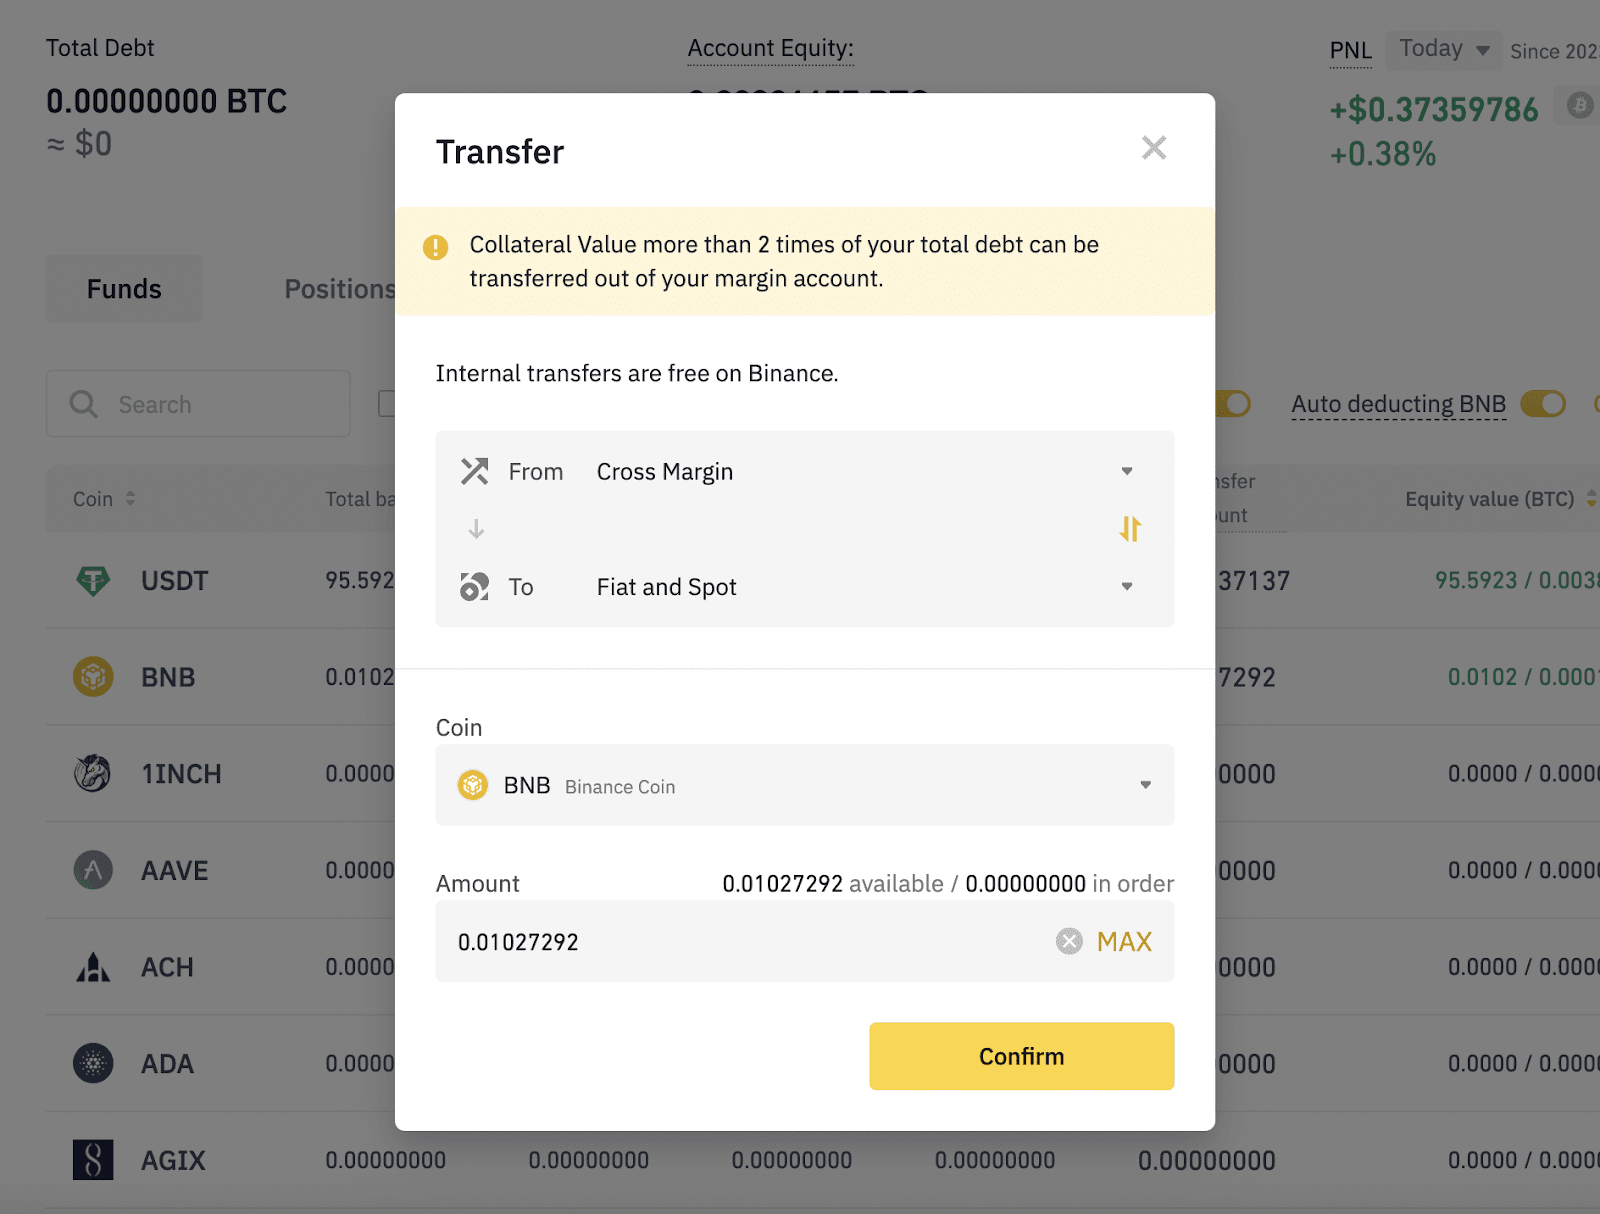 Binance Margin Trading What It Is and How to Do It?